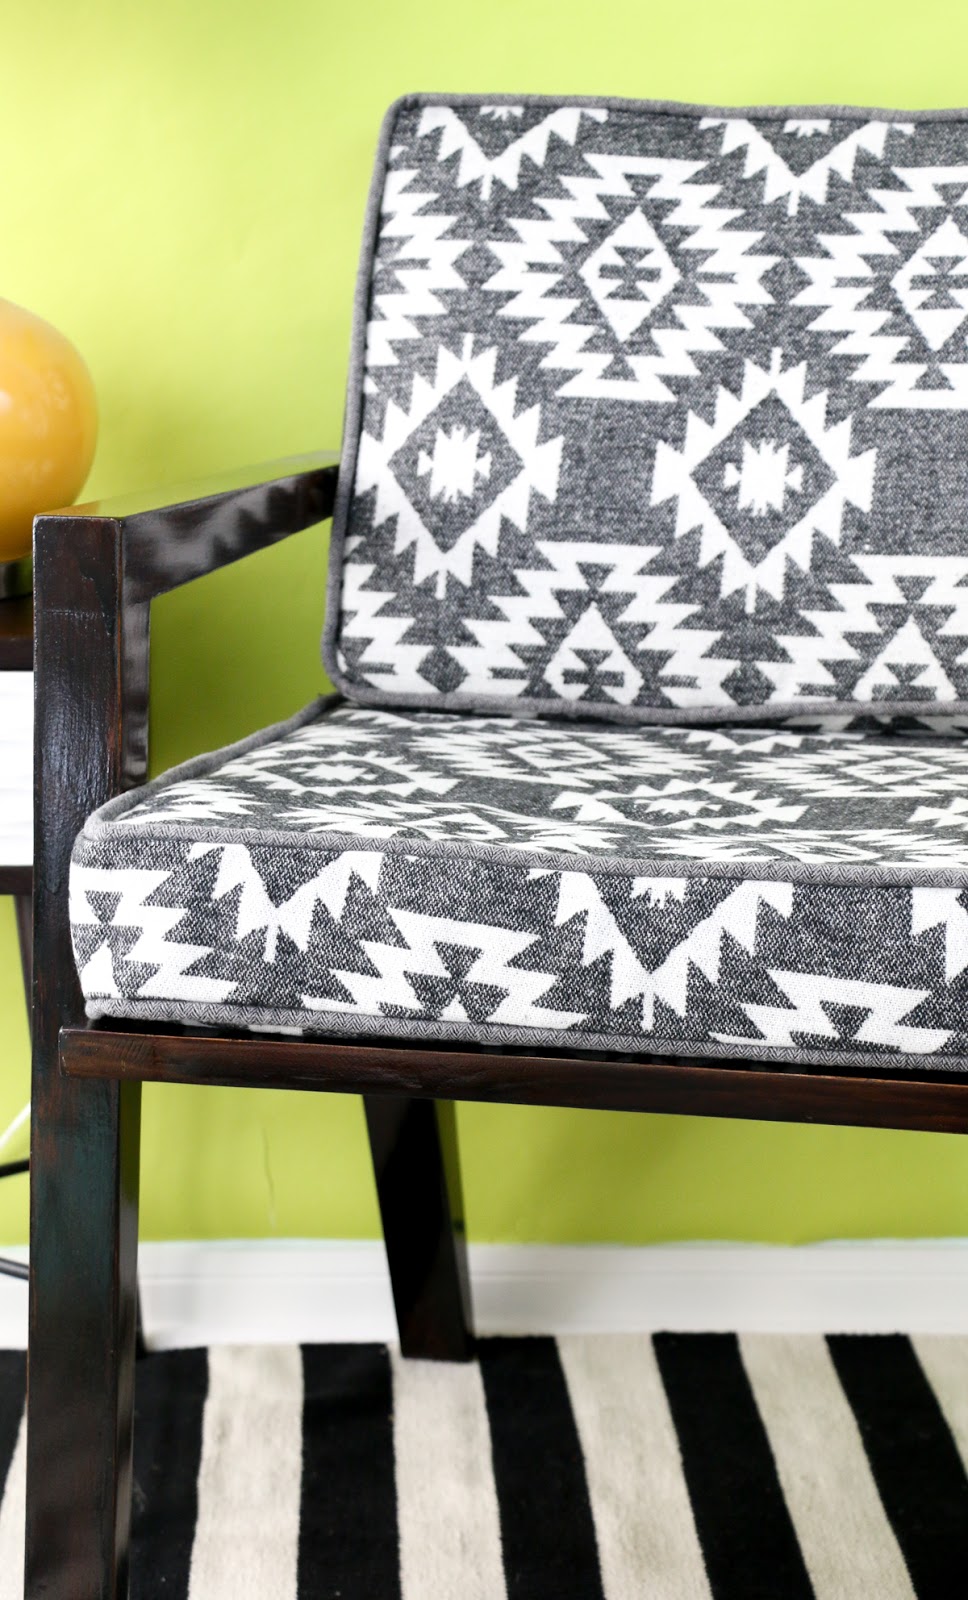 Sew It Recovering Old Chair Cushions, How To Recover A Chair Cushion With Piping